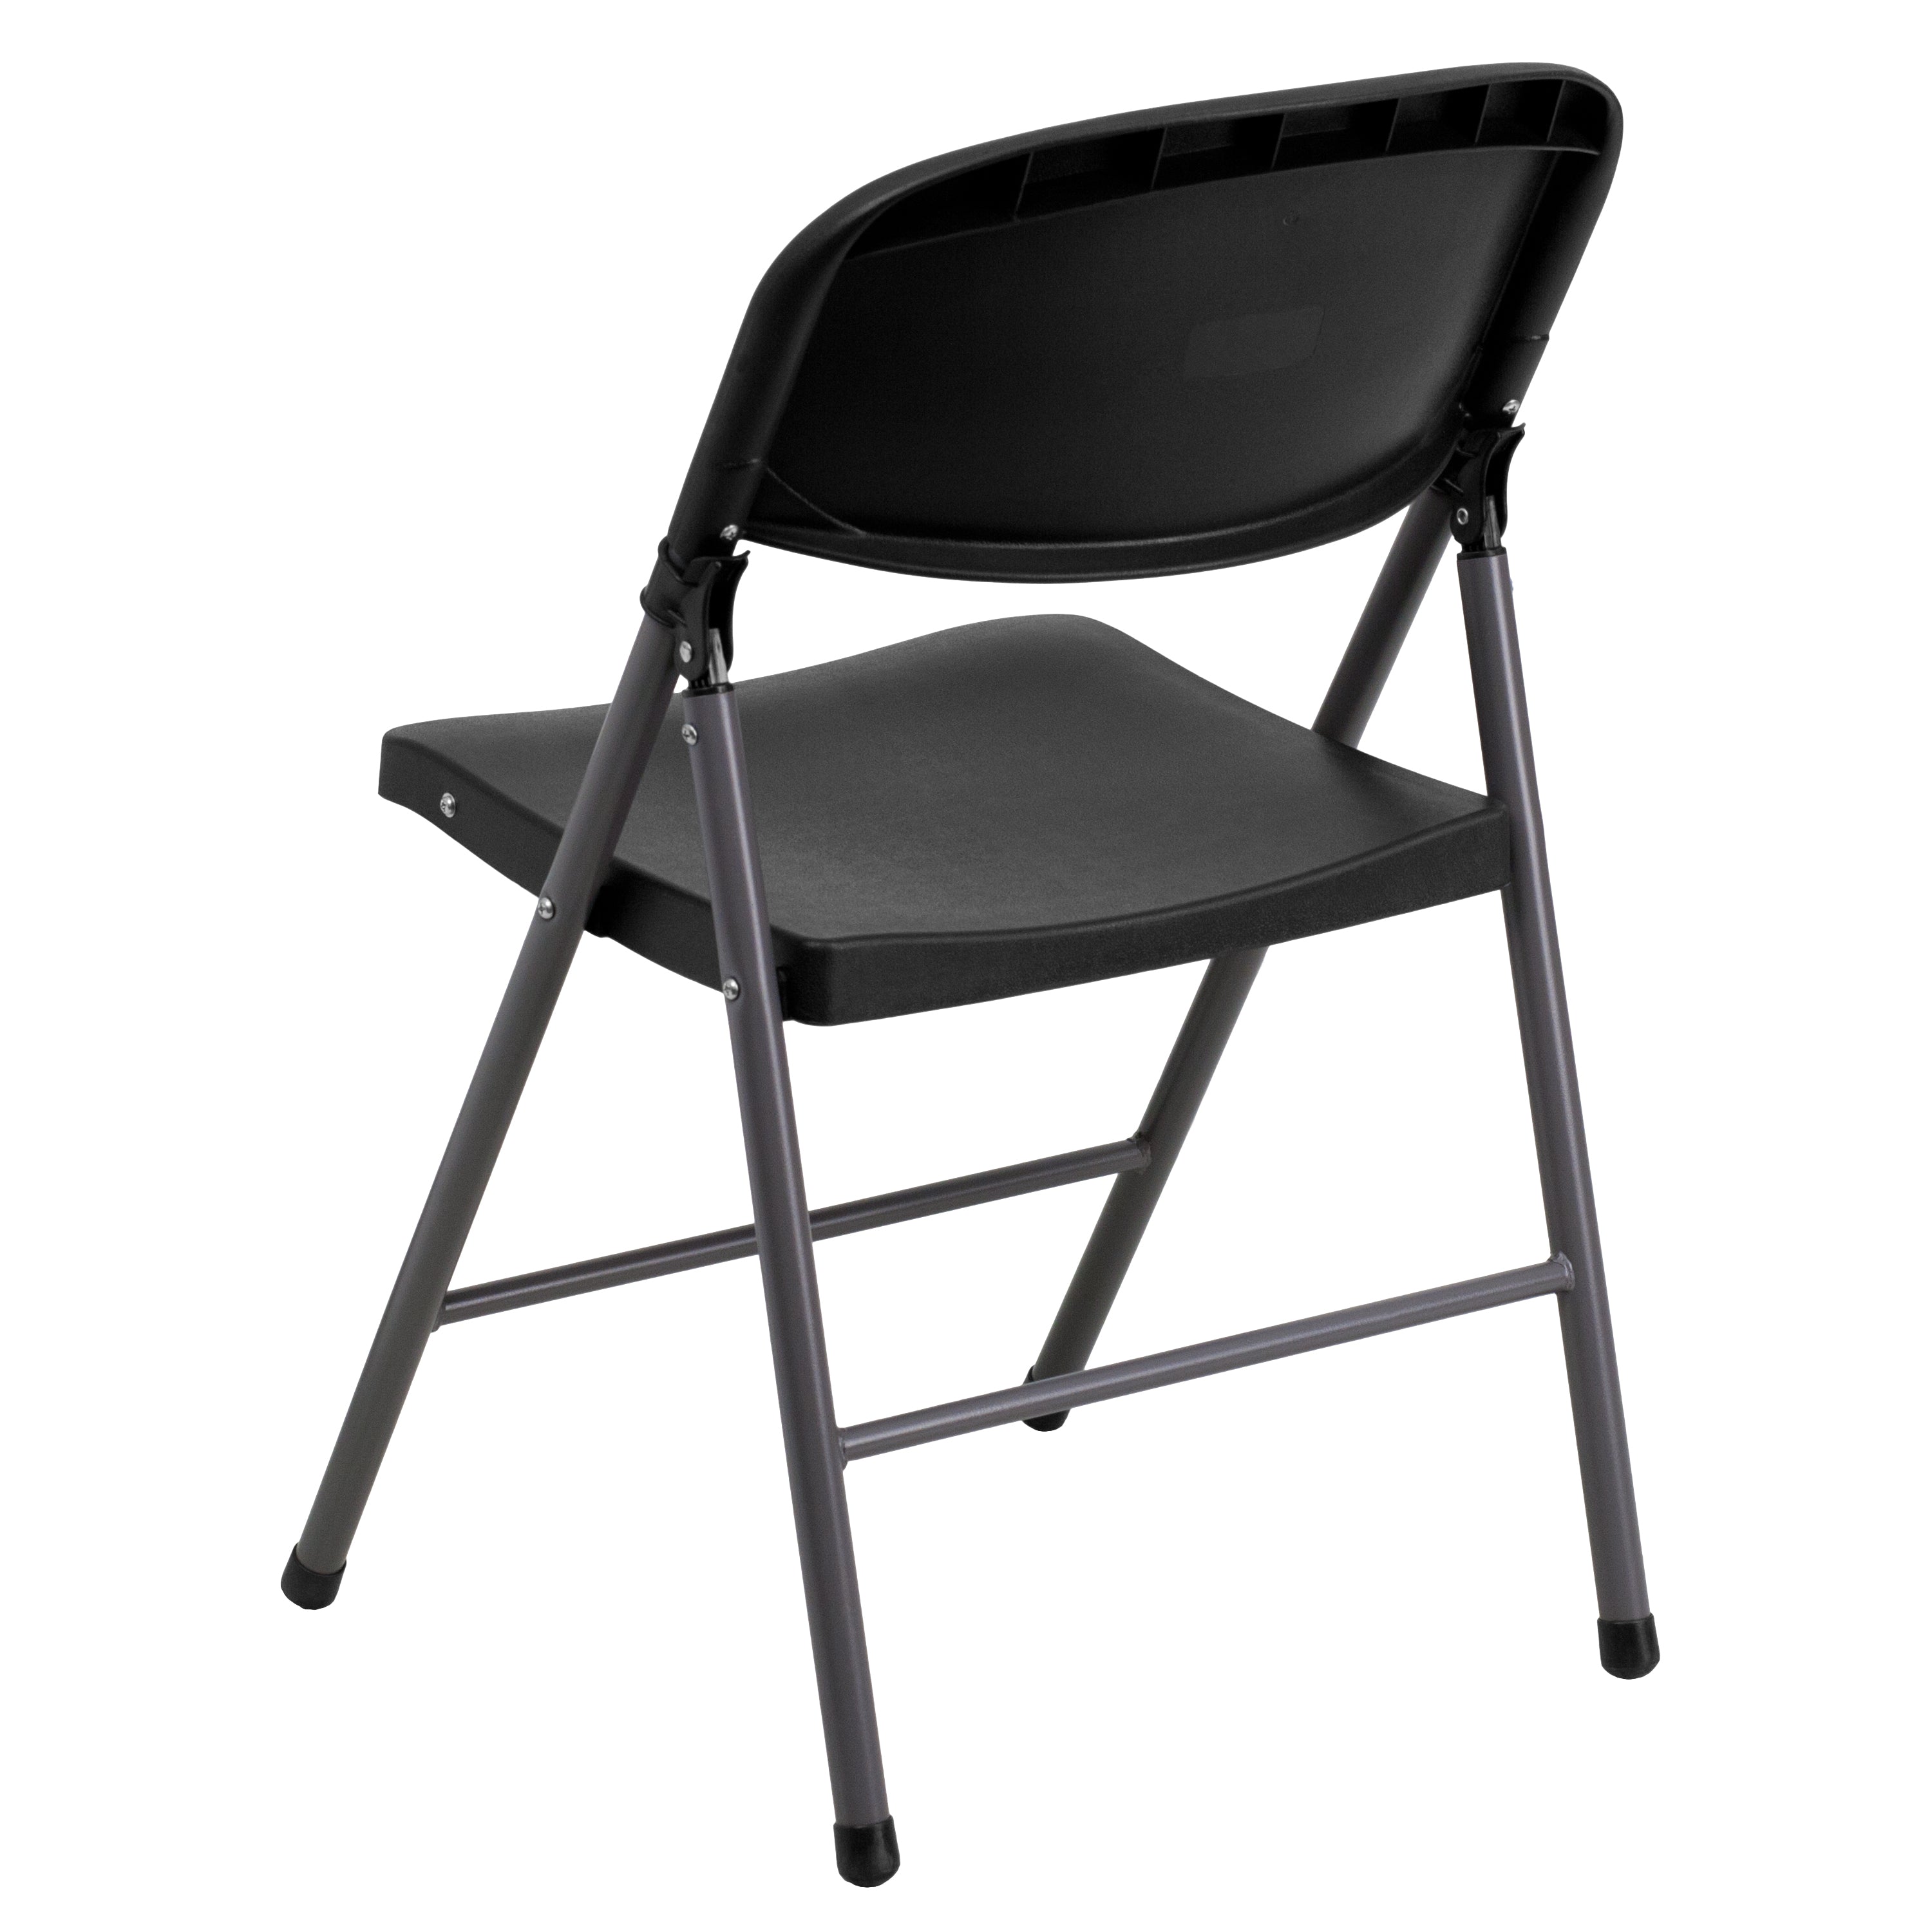 2 Pack HERCULES Series 330 lb. Capacity Plastic Folding Chair with Charcoal Frame-Metal Folding Chair-Flash Furniture-Wall2Wall Furnishings